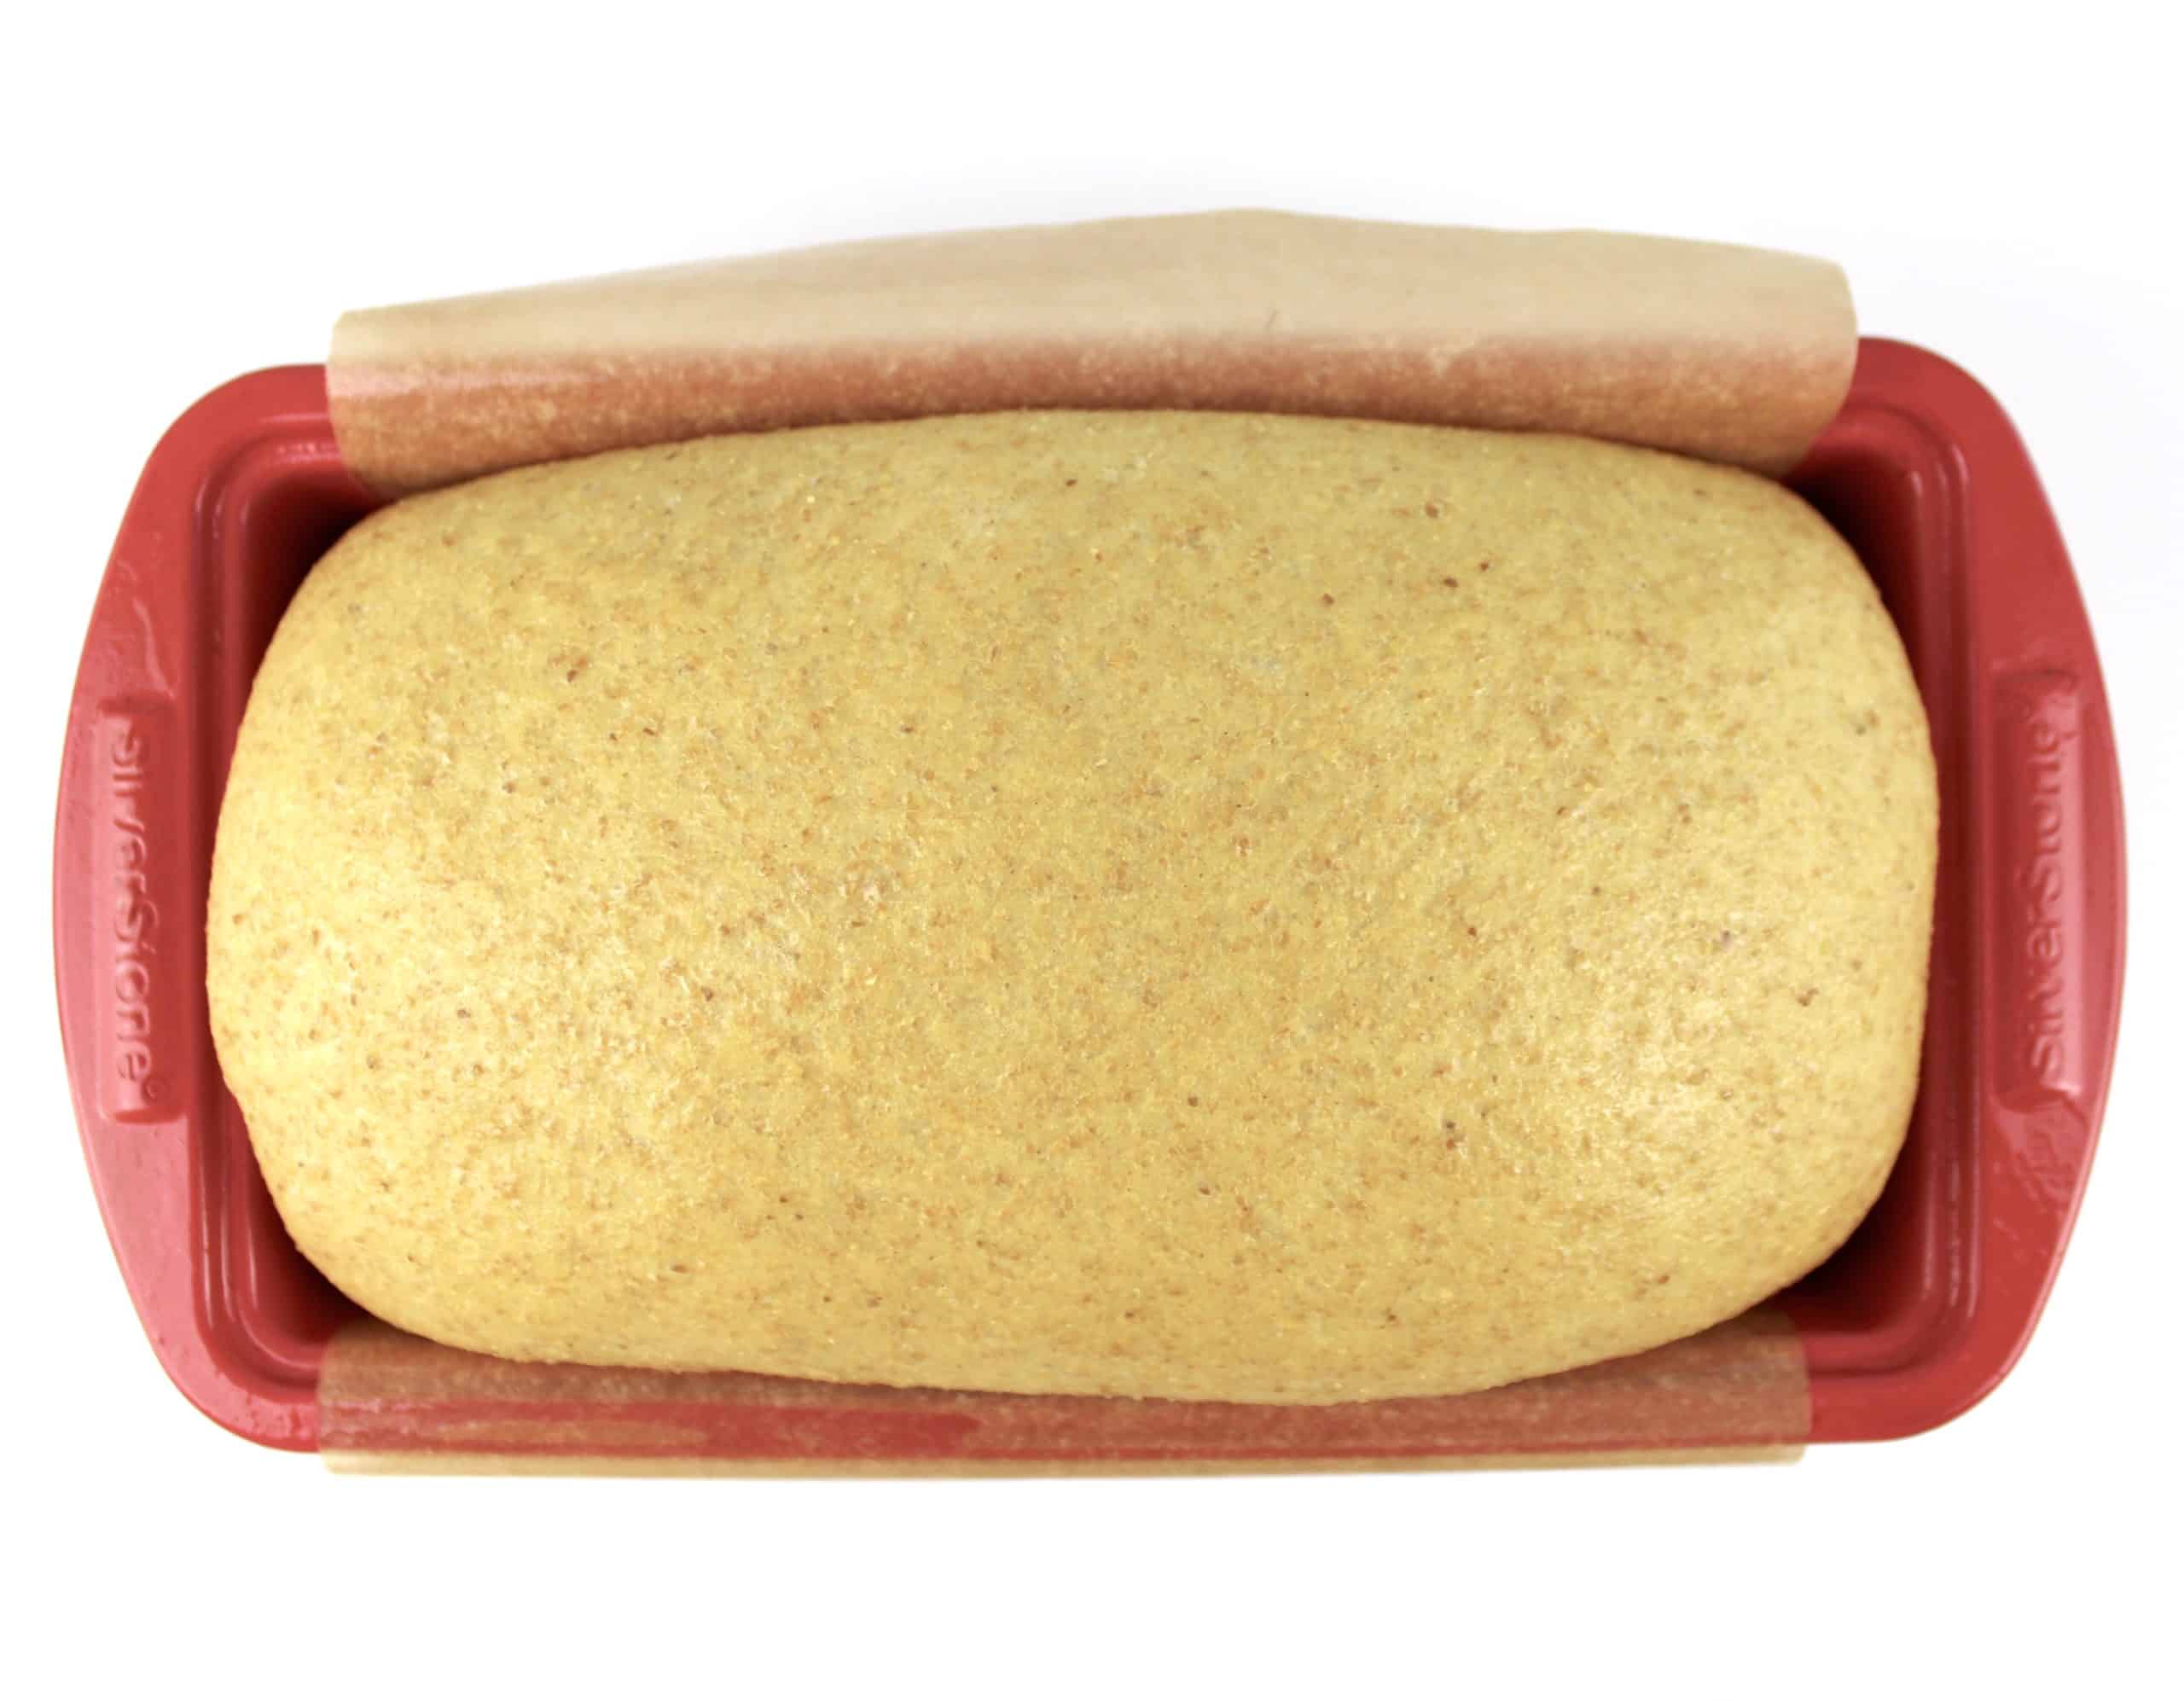 risen bread dough in red loaf pan